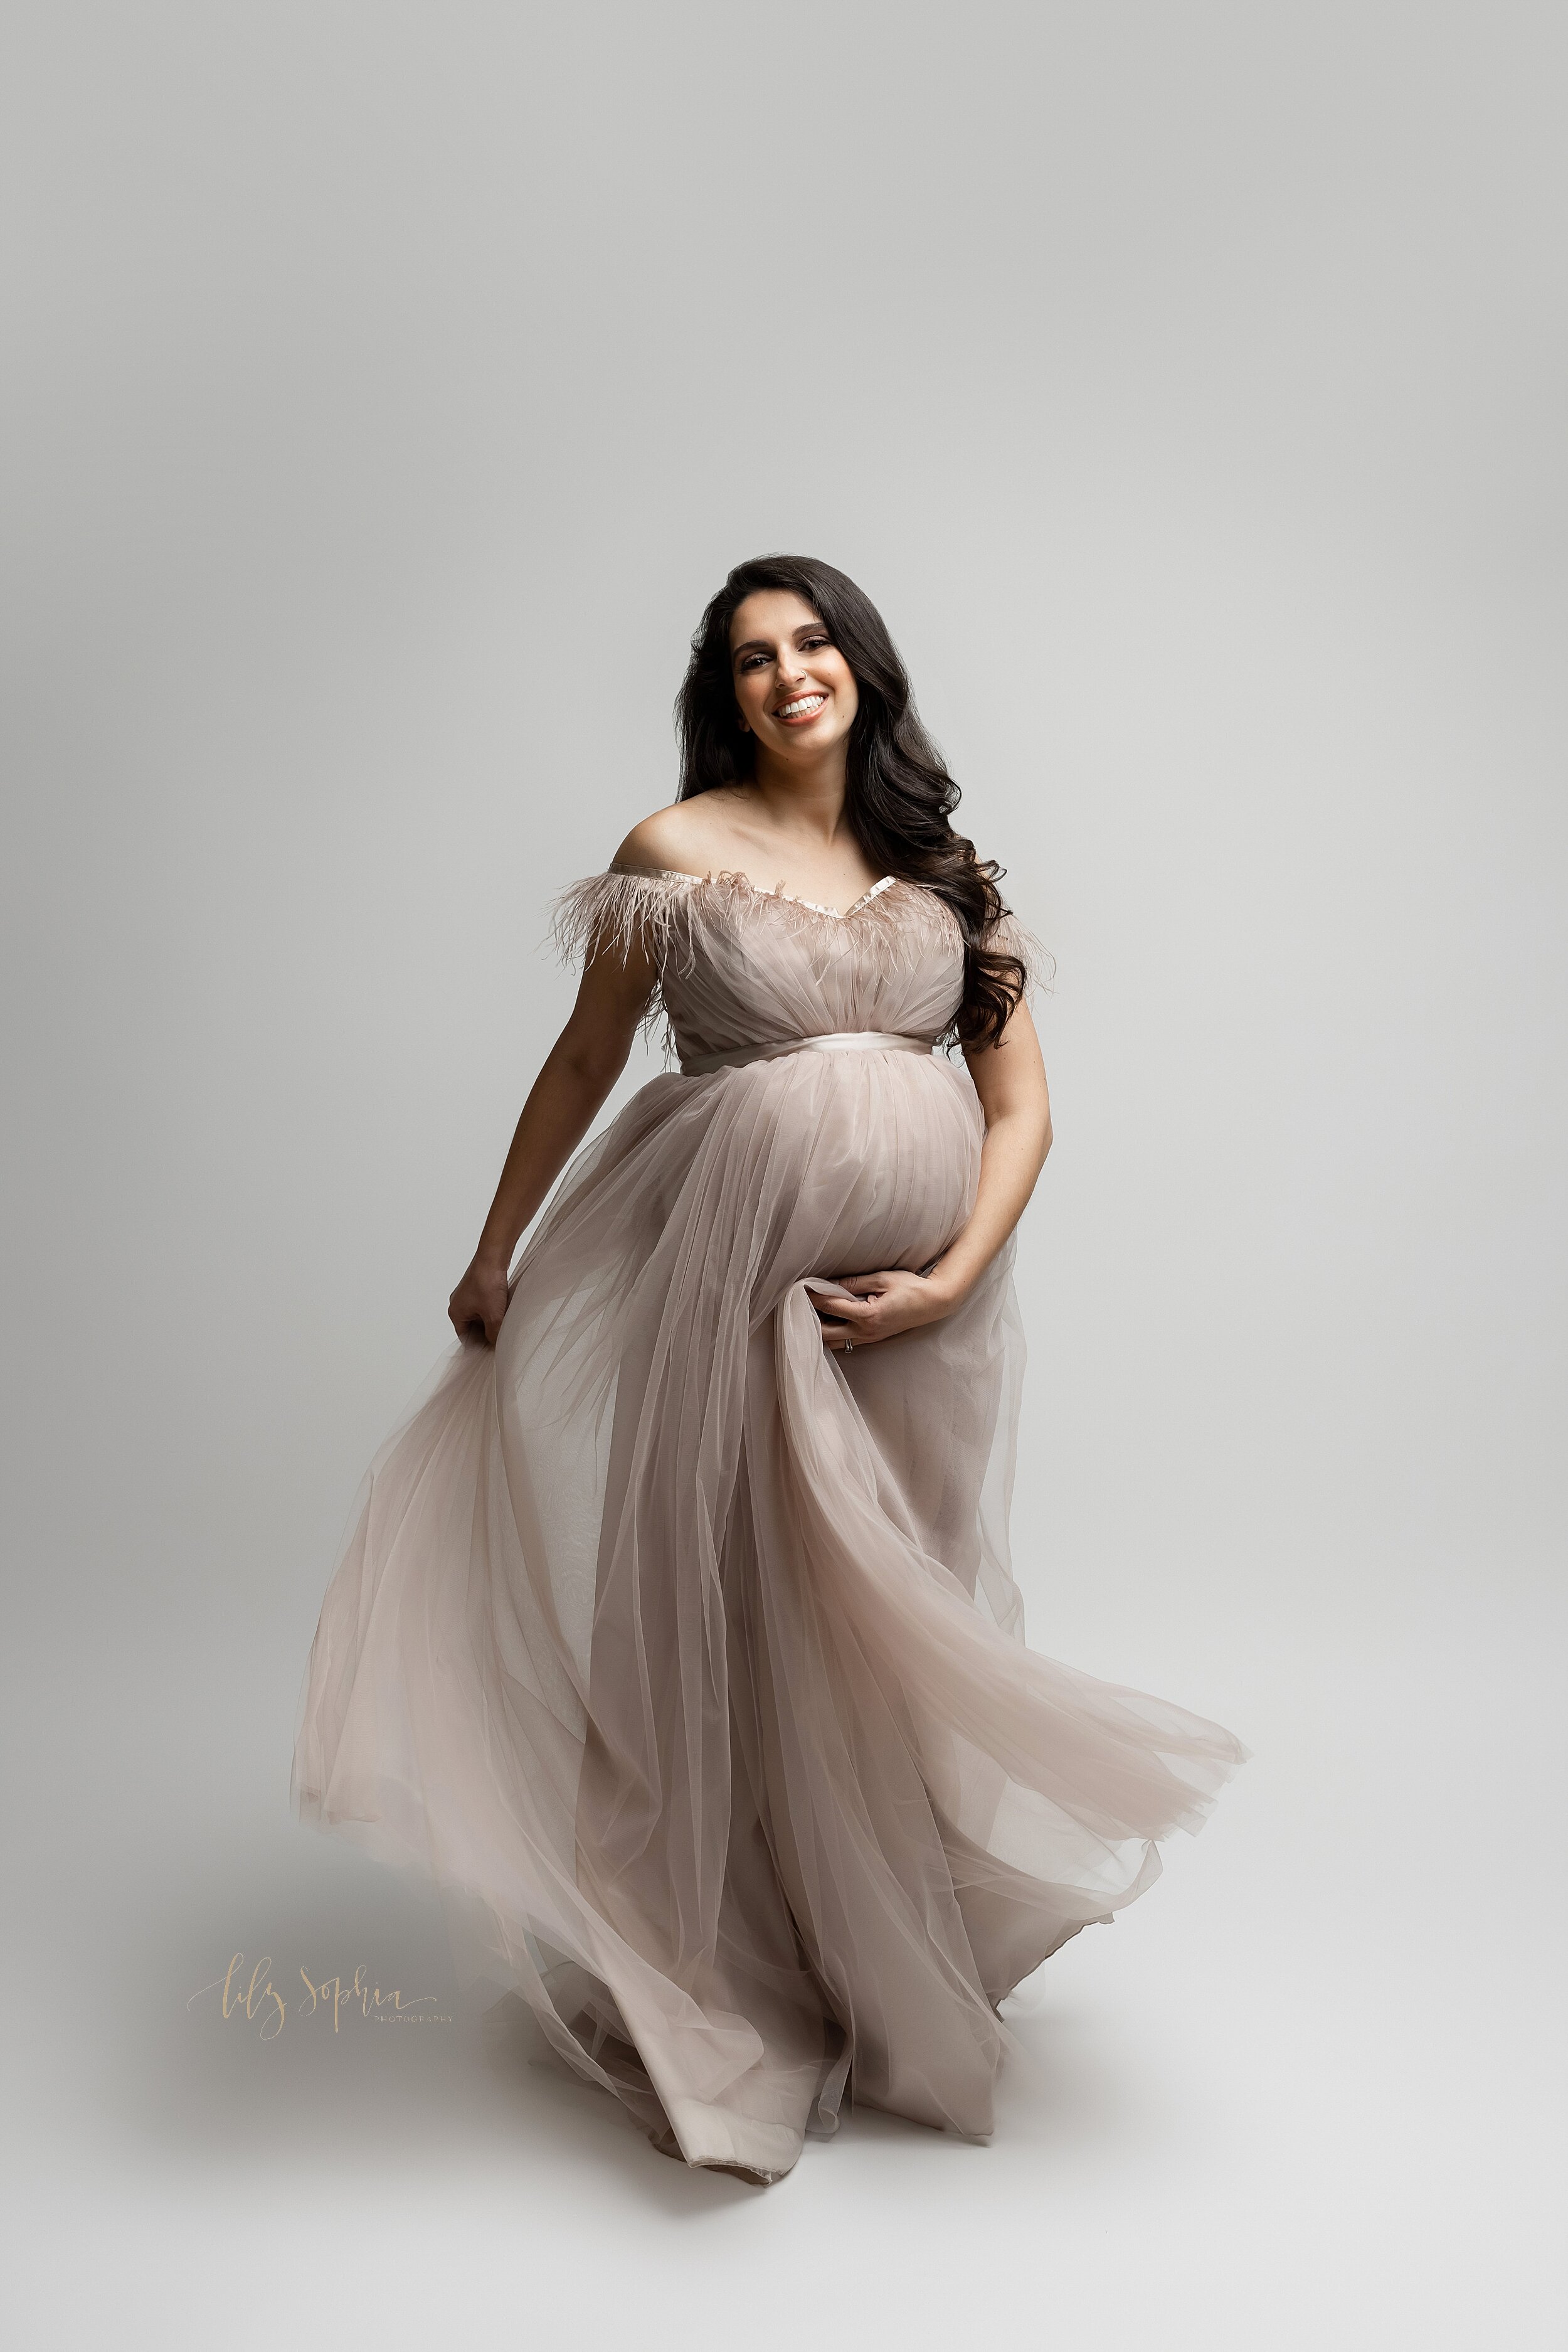  A fine art maternity photo of a happy and smiling pregnant woman with long brown hair wearing a grey tulle haute couture maternity gown with ostrich feathers with one hand on her belly and the other holding the dress. 